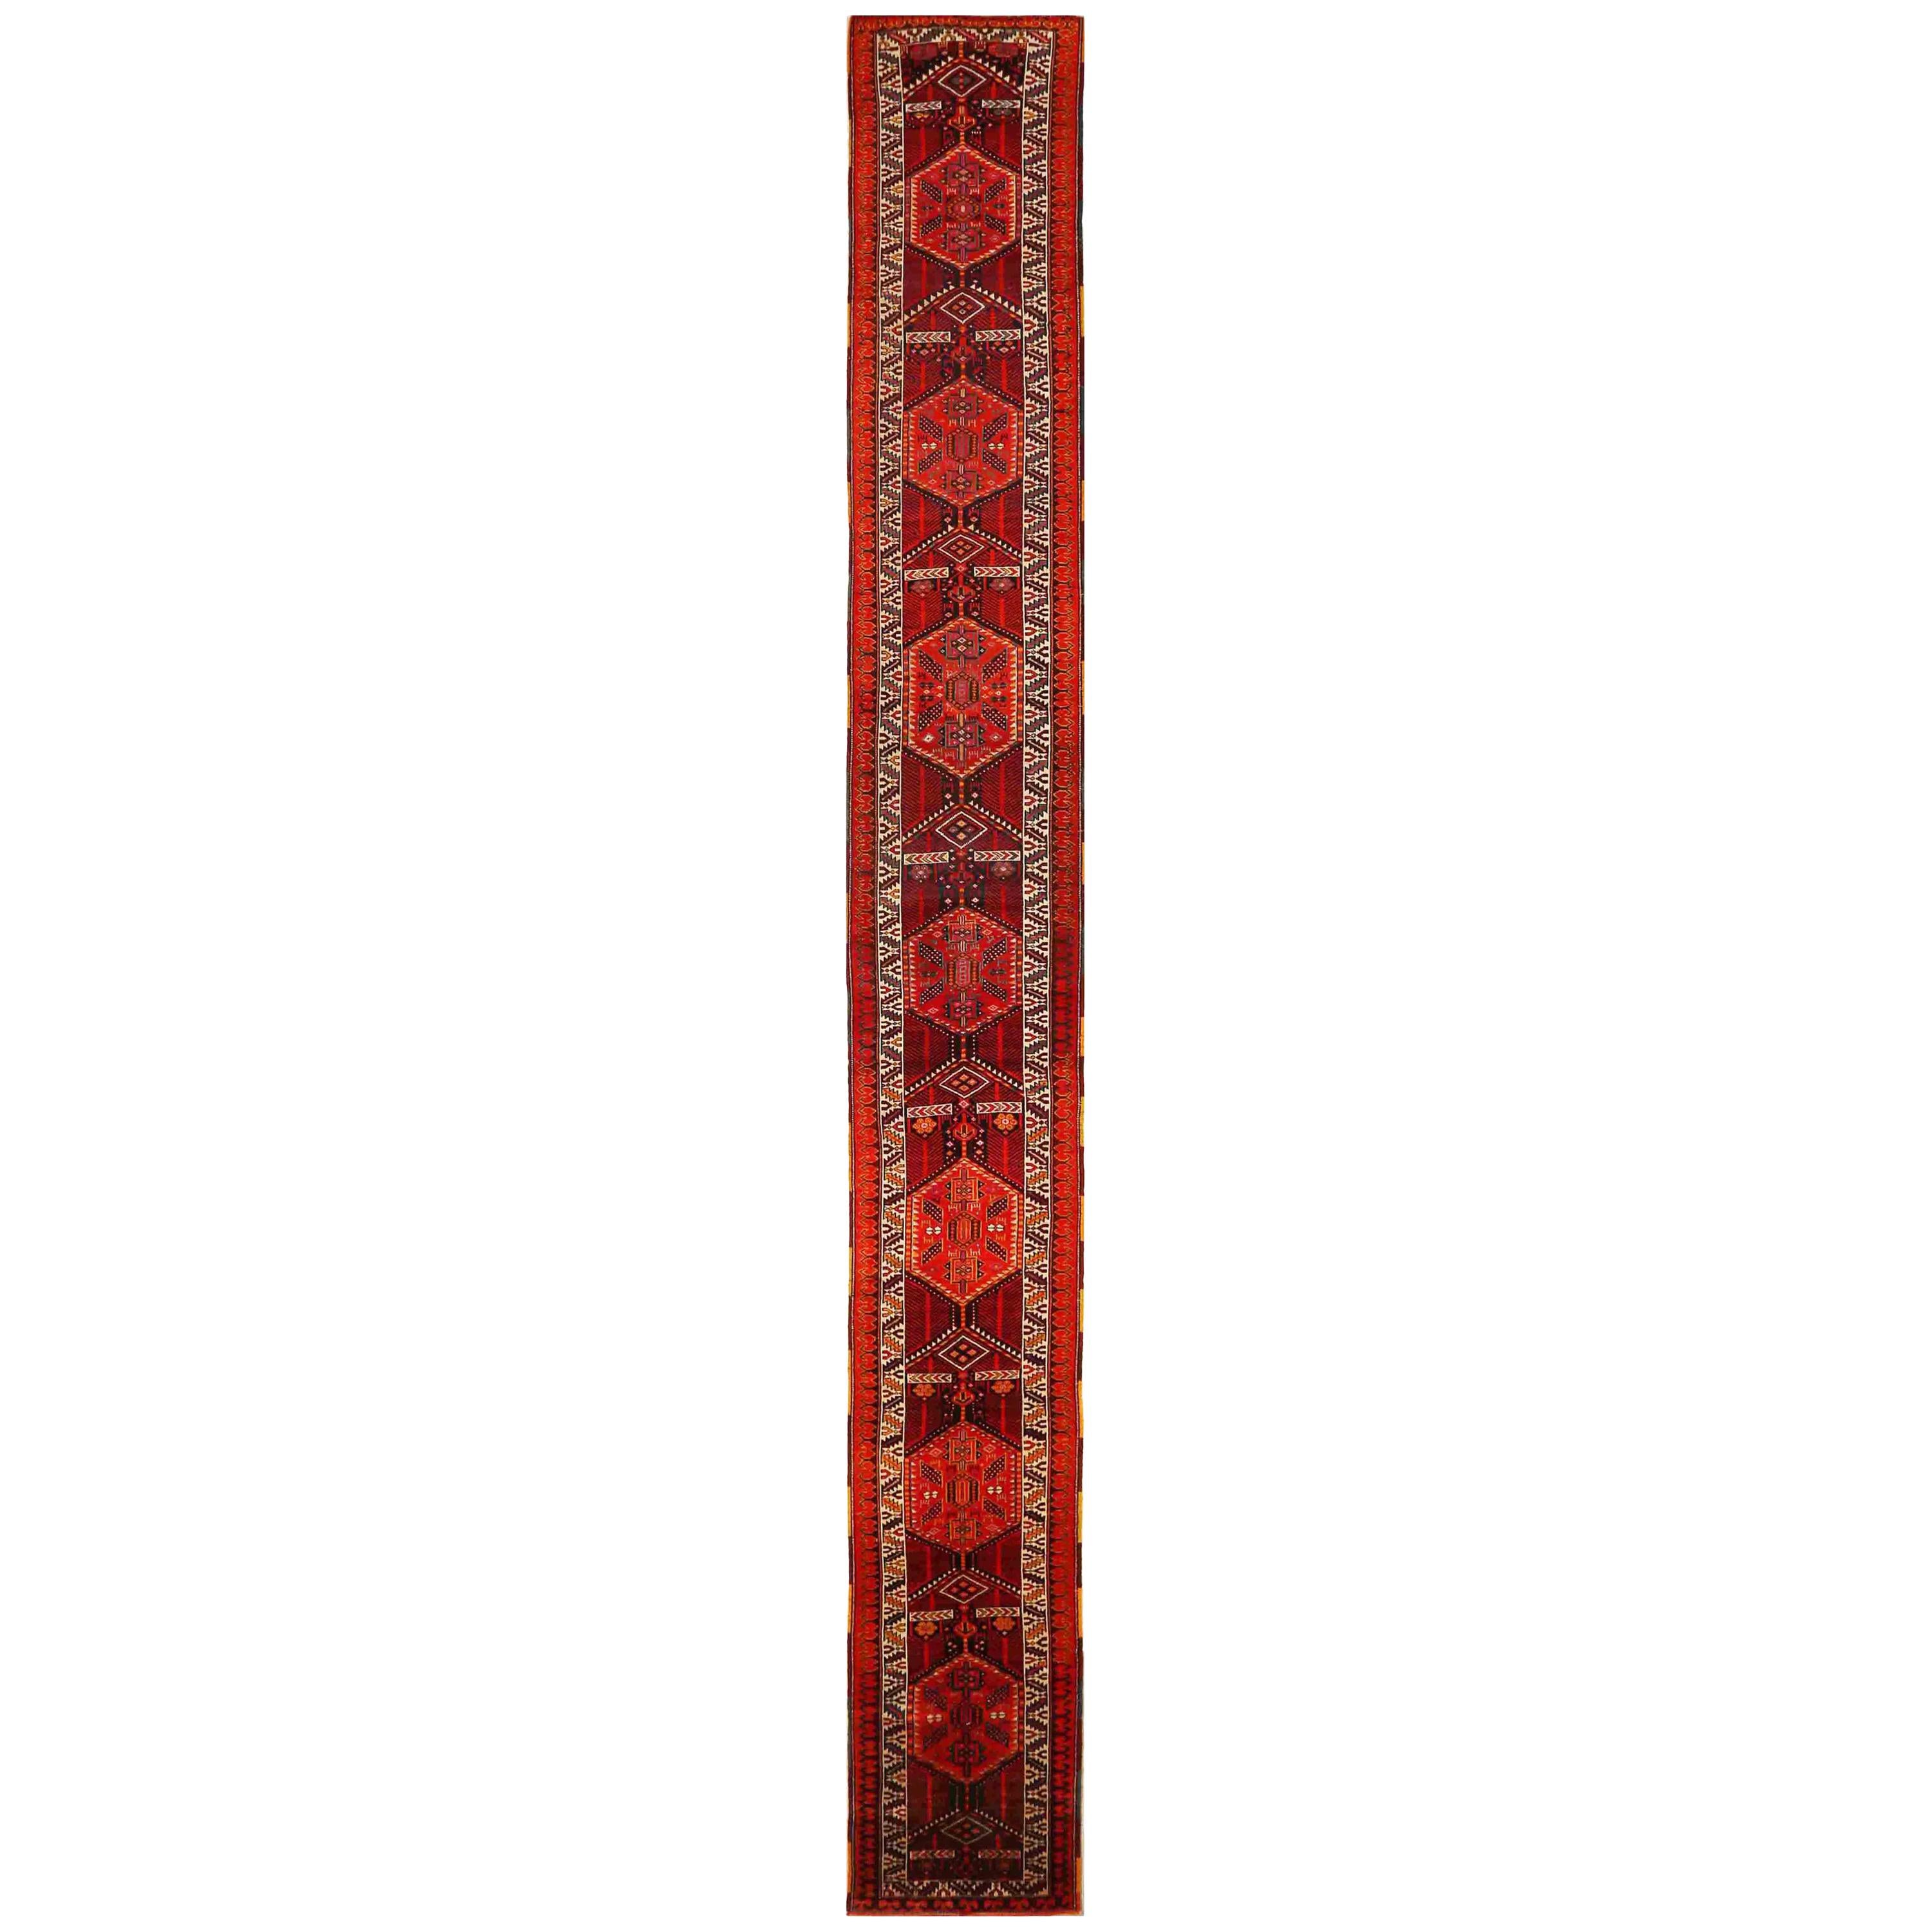 Antique Persian Rug with Tribal Design and Extraordinary Length, circa 1900s